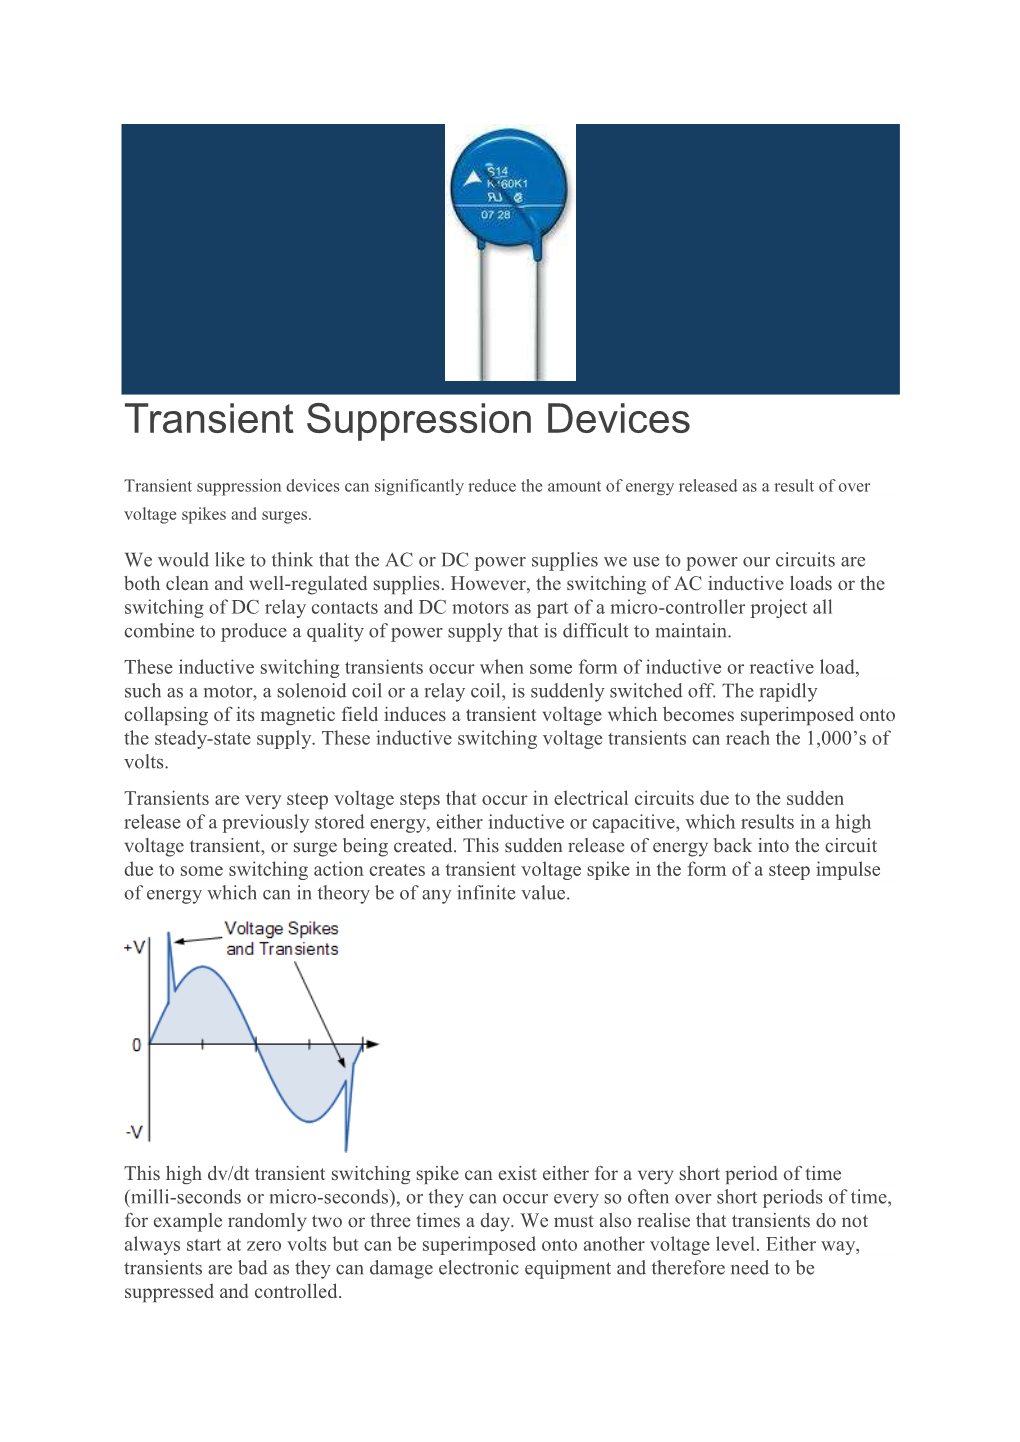 Transient Suppression Devices